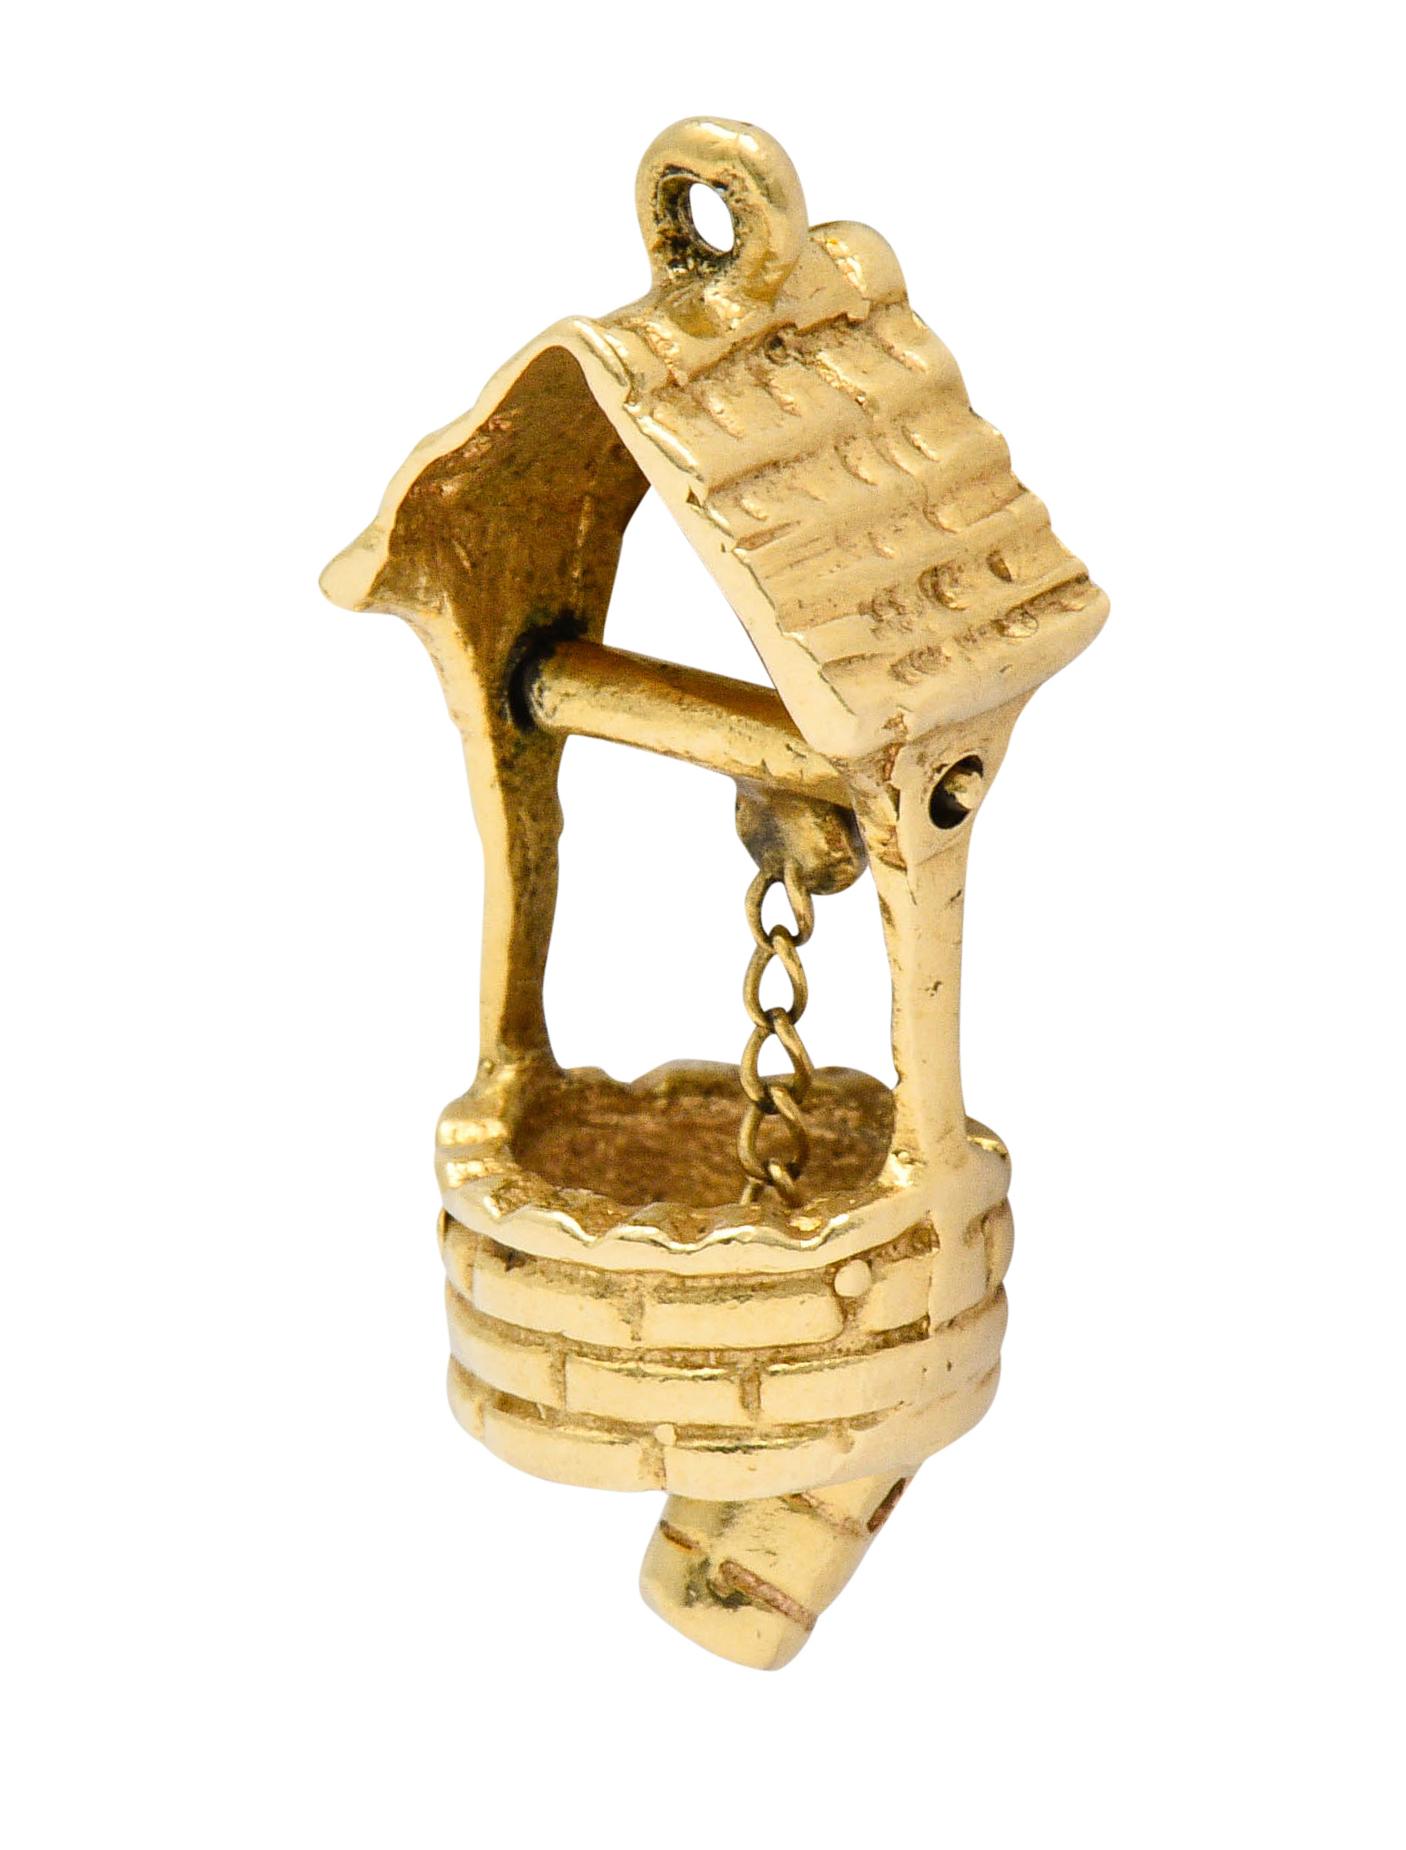 Designed as a wishing well with a pitched roof and circular brick base

With an articulated crank suspending a cable chain terminating as a bucket

Tested as 14 karat gold

Measures: 3/8 x 7/8 inch

Total weight: 2.4 grams

Heartfelt. Hopeful.